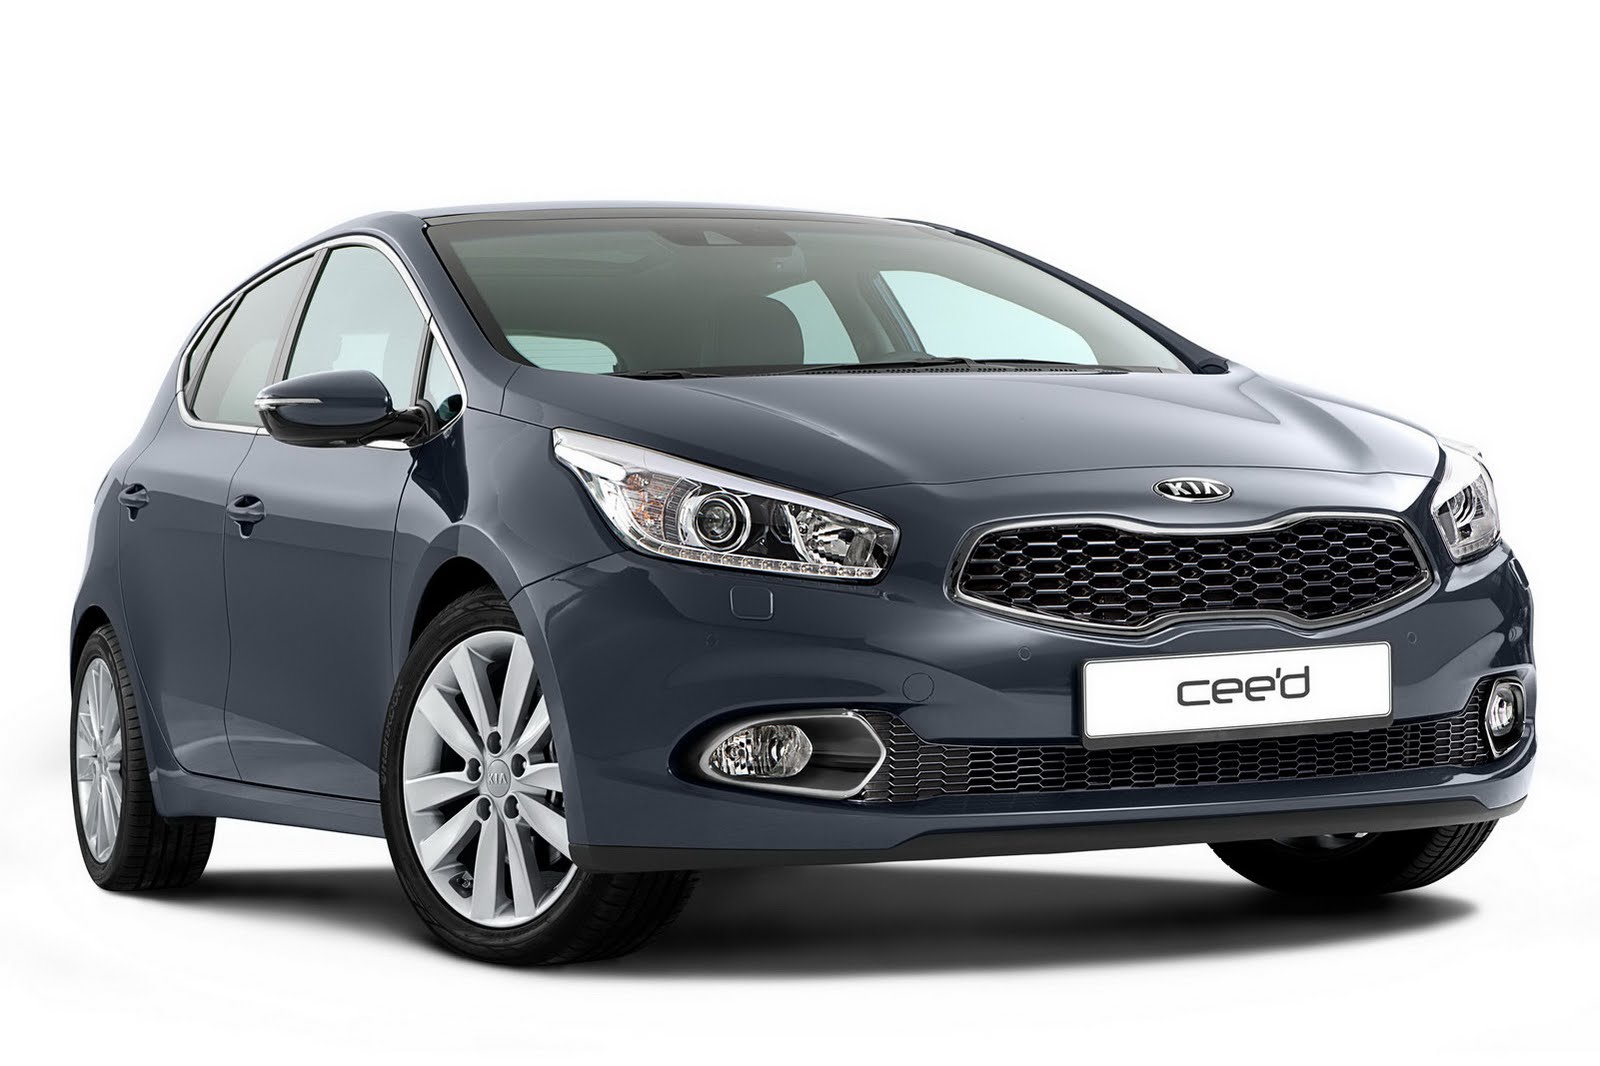 IN4RIDE NEW KIA CEE'D PICTURES OUT